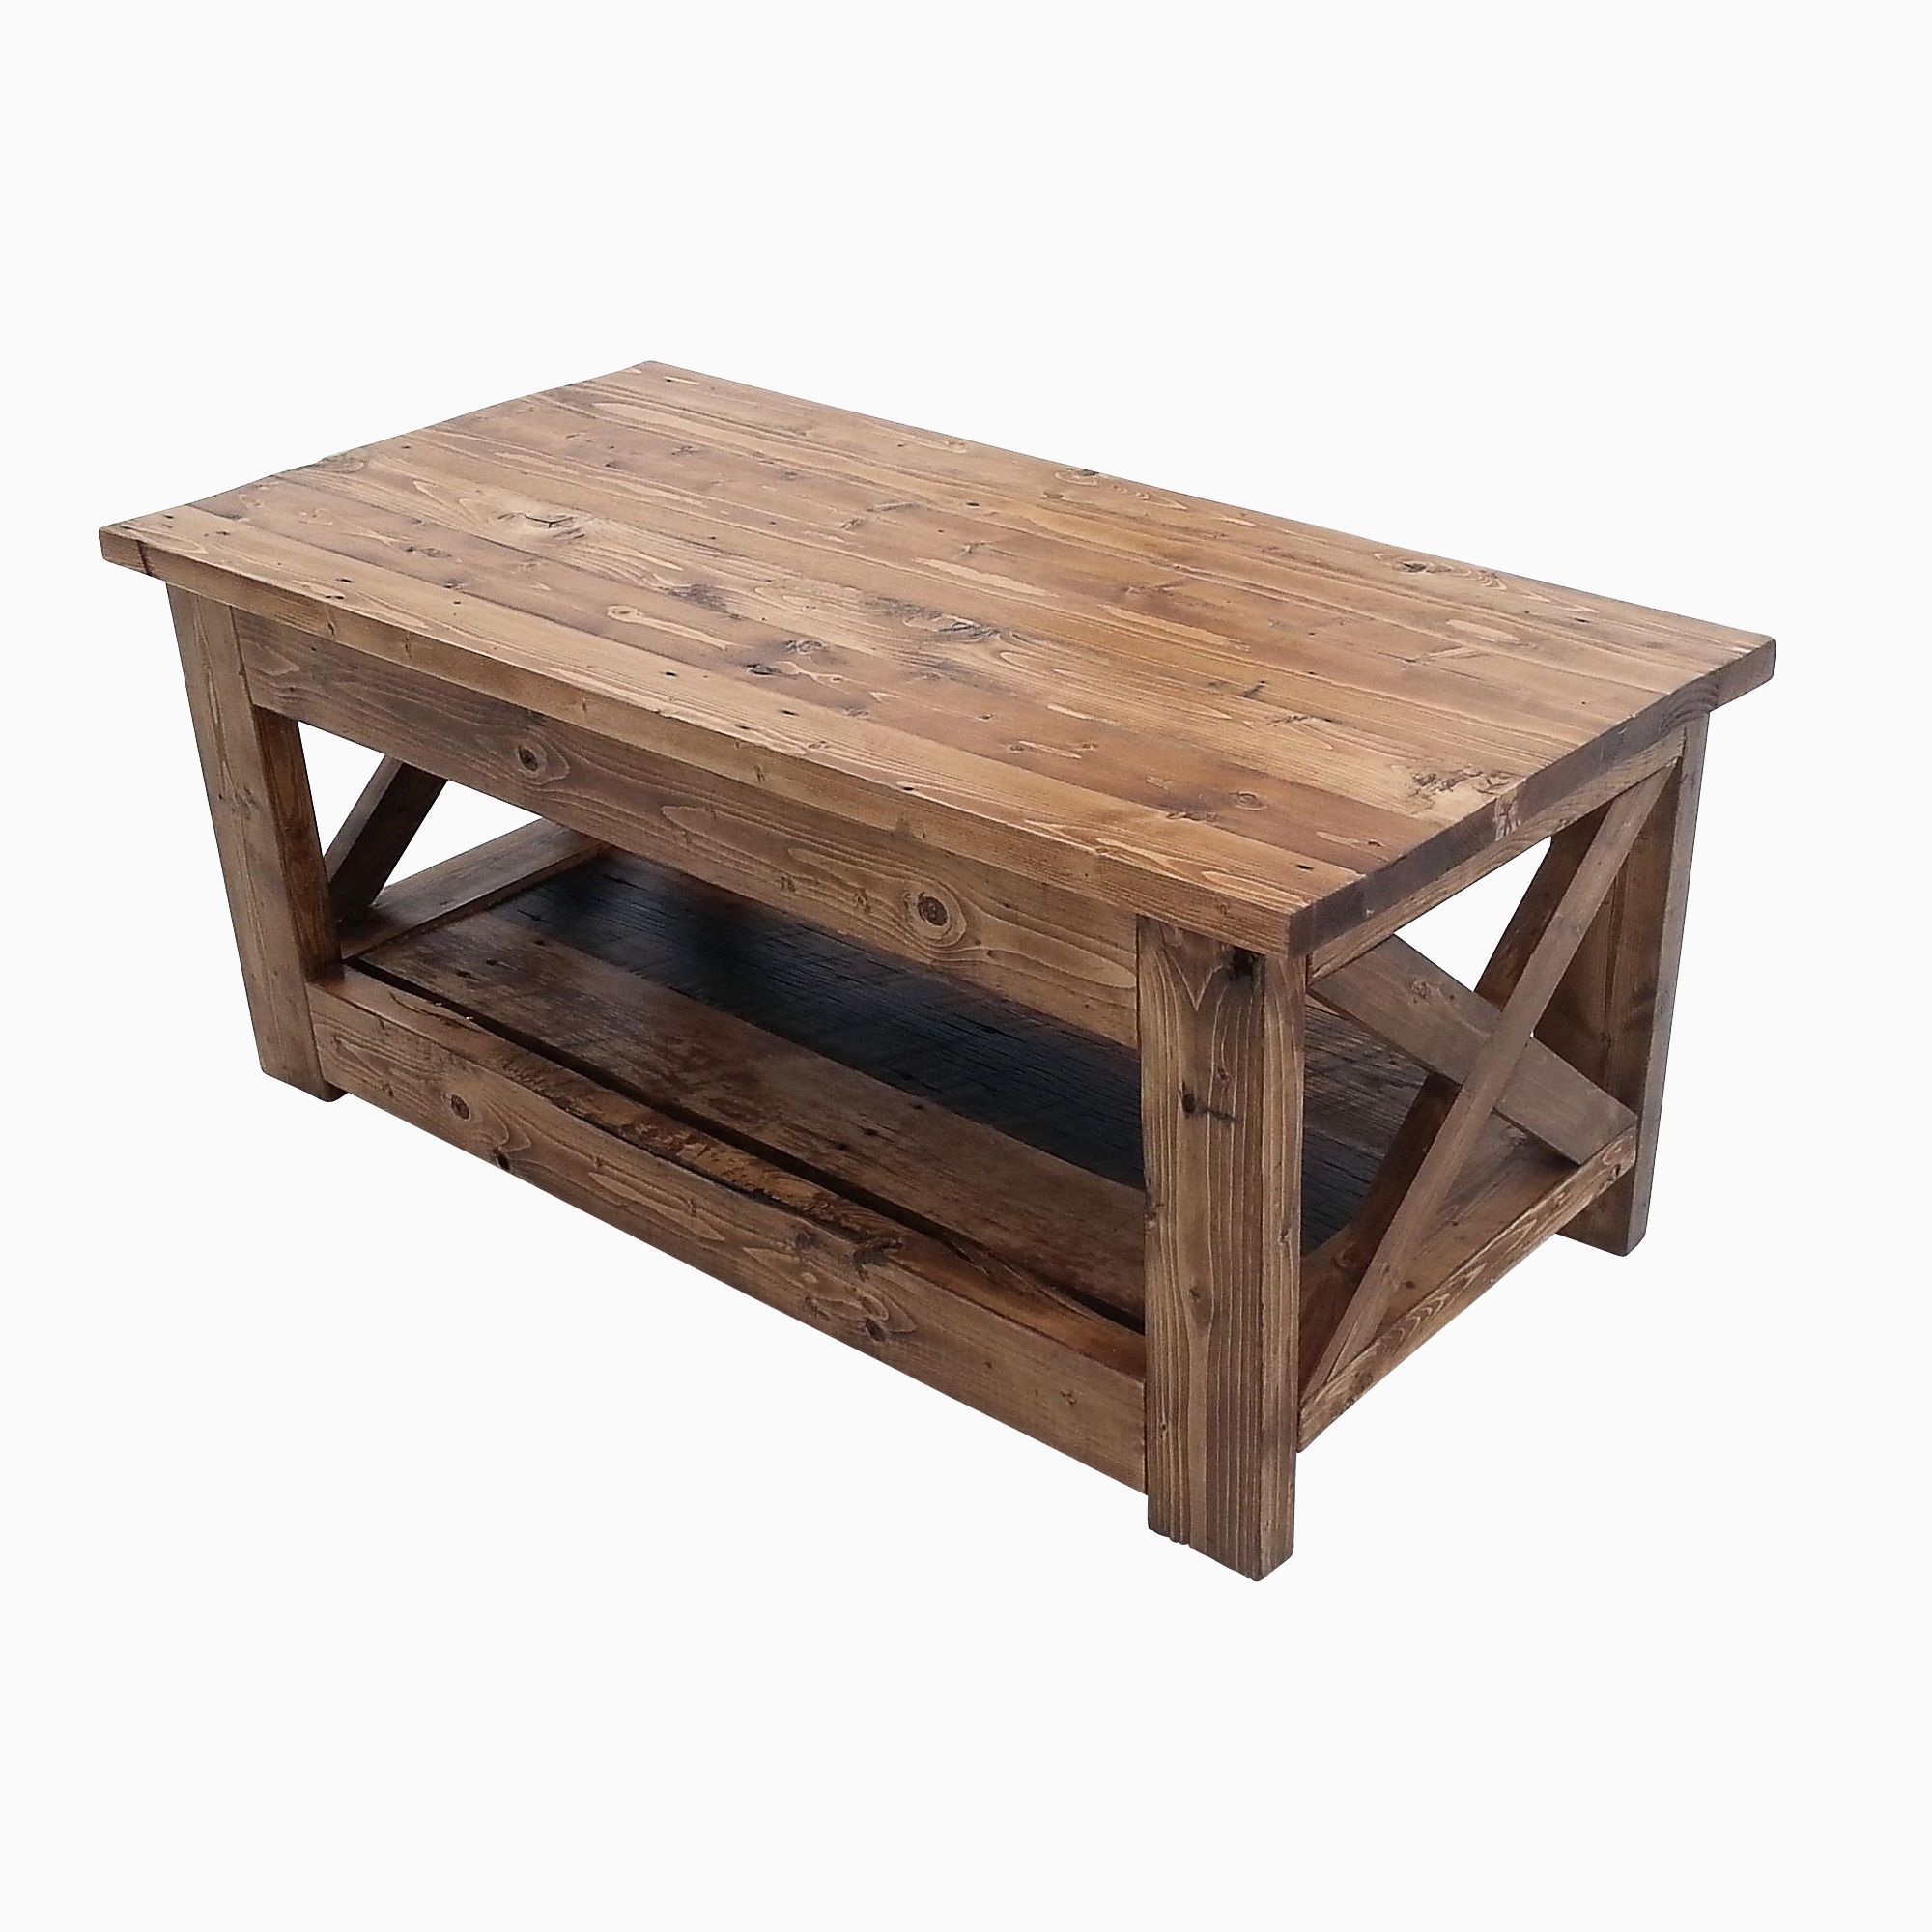 Buy Custom Reclaimed Wood Rustic Style Coffee Table, Made To Order From Within Rustic Wood Coffee Tables (View 21 of 21)